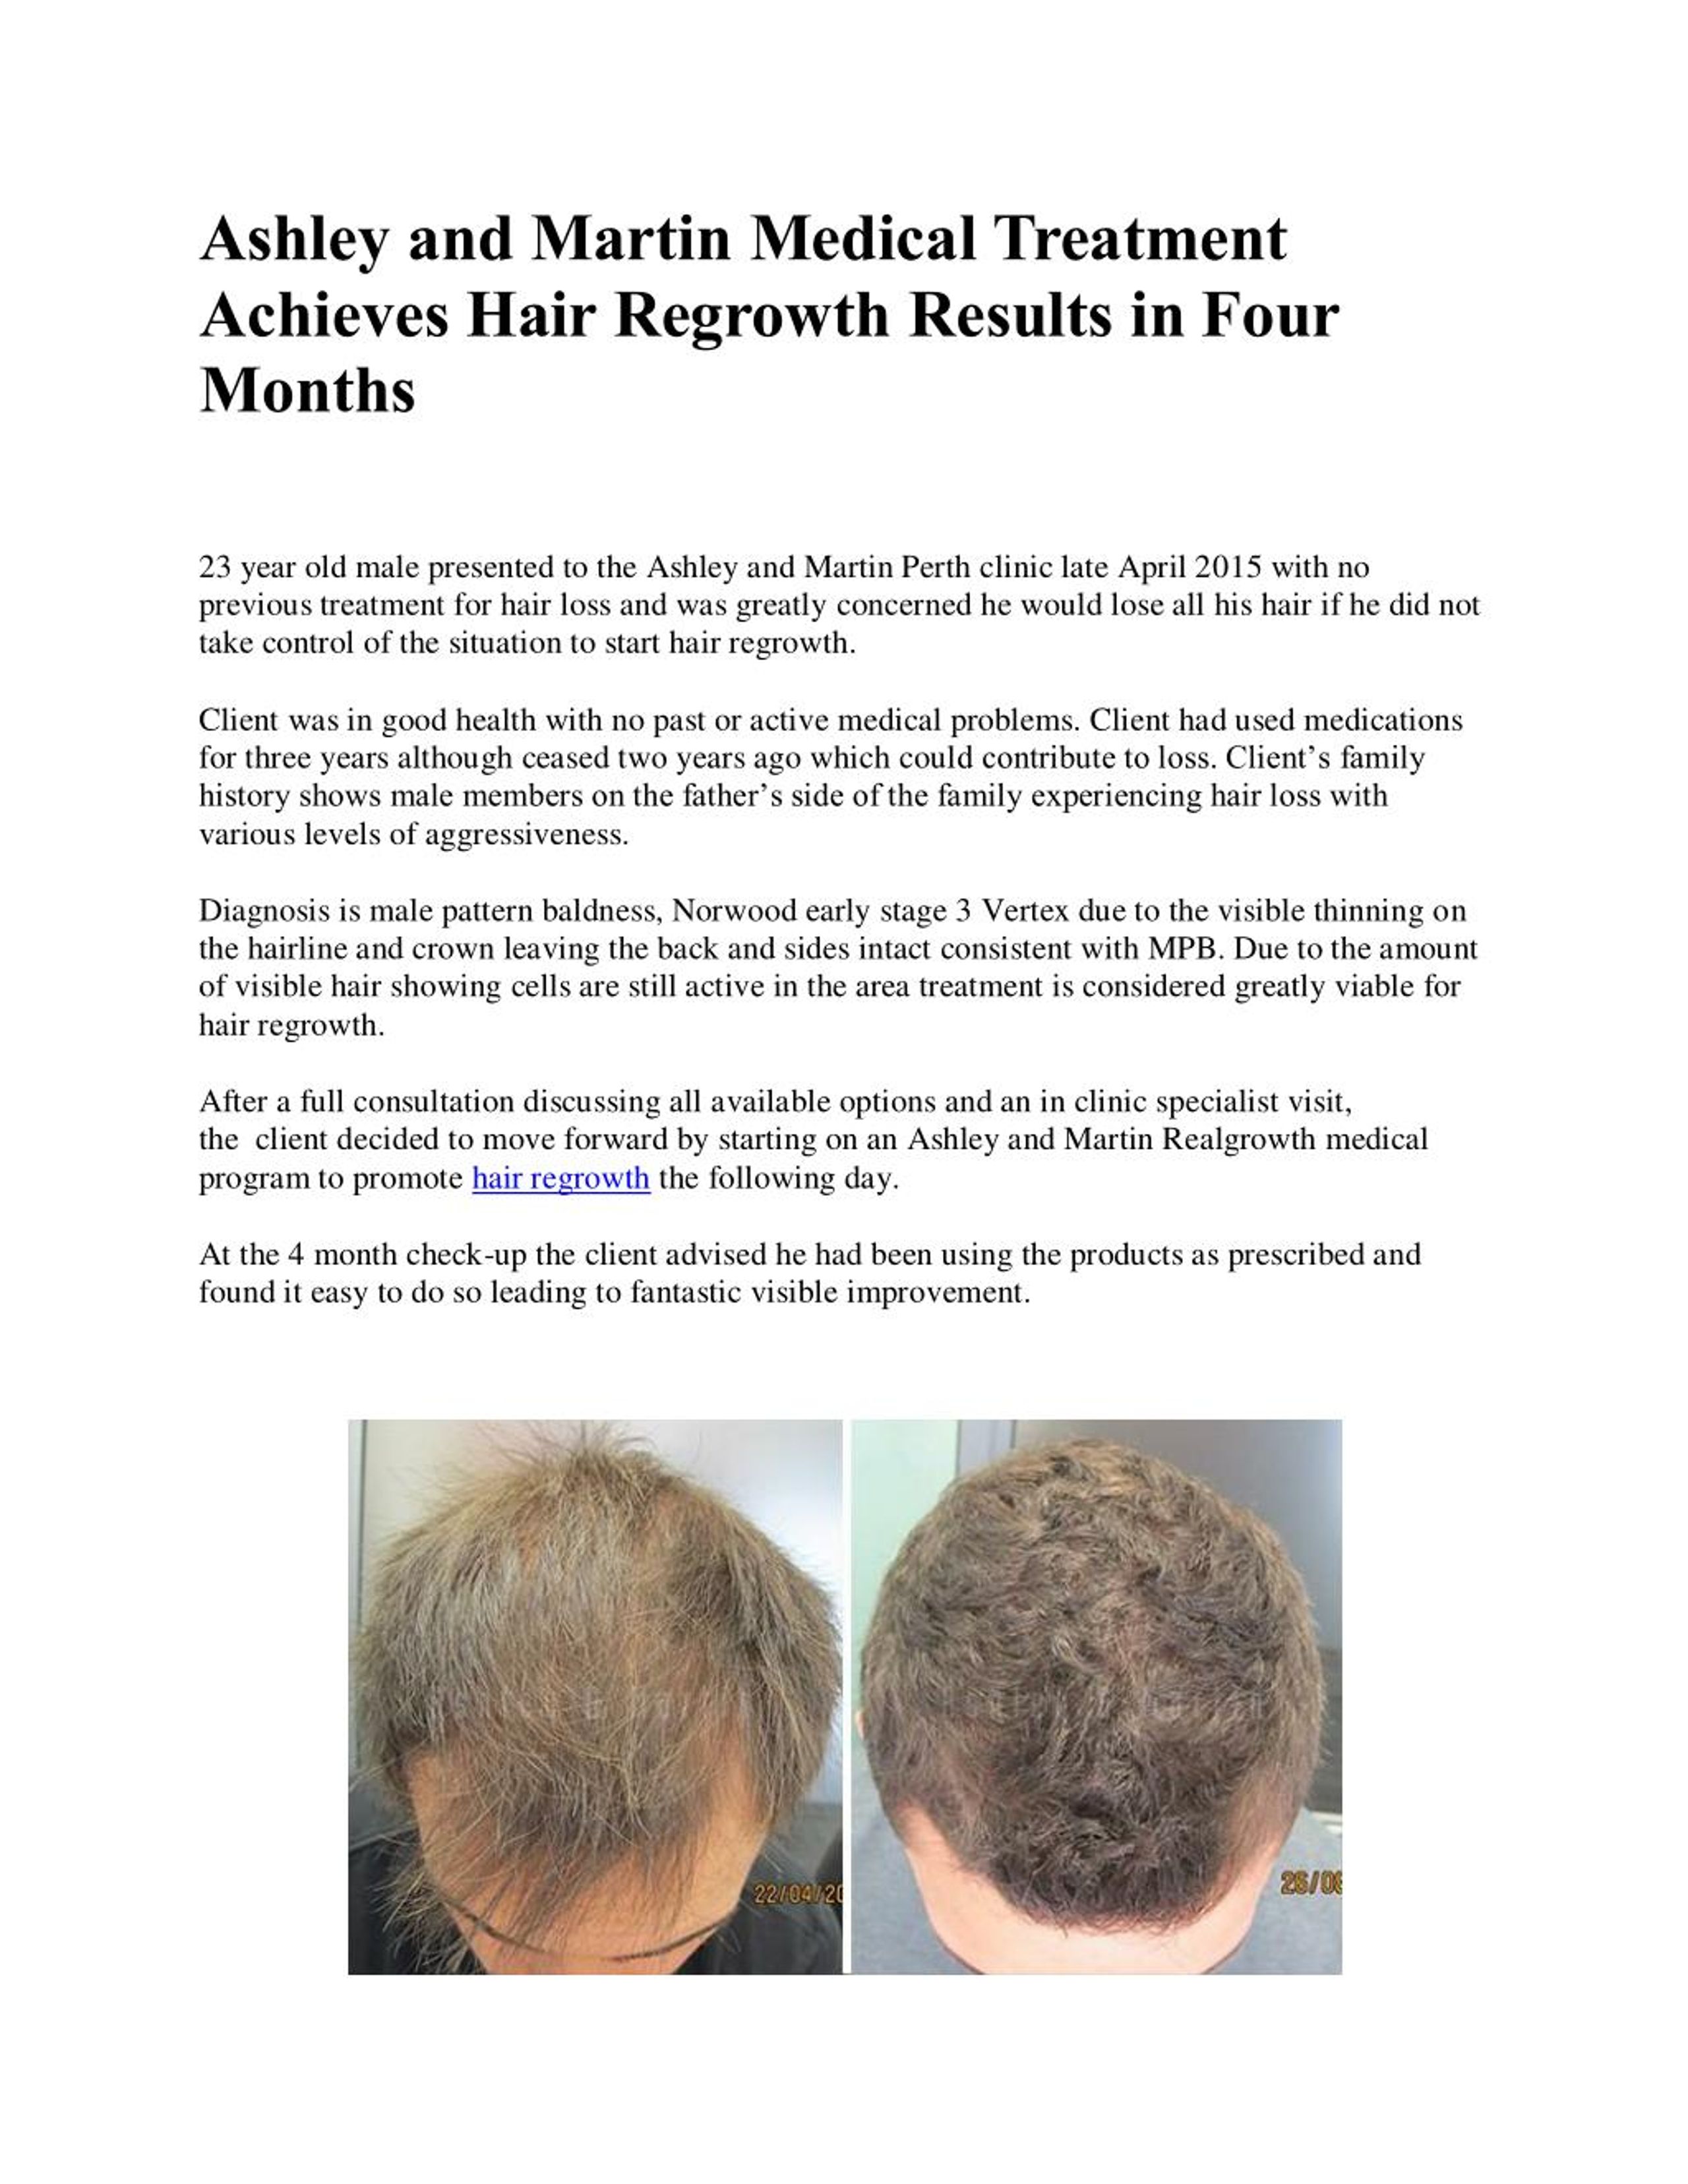 PPT - Ashley and Martin Medical Treatment Achieves Hair Regrowth Results in Four  Months PowerPoint Presentation - ID:7303375